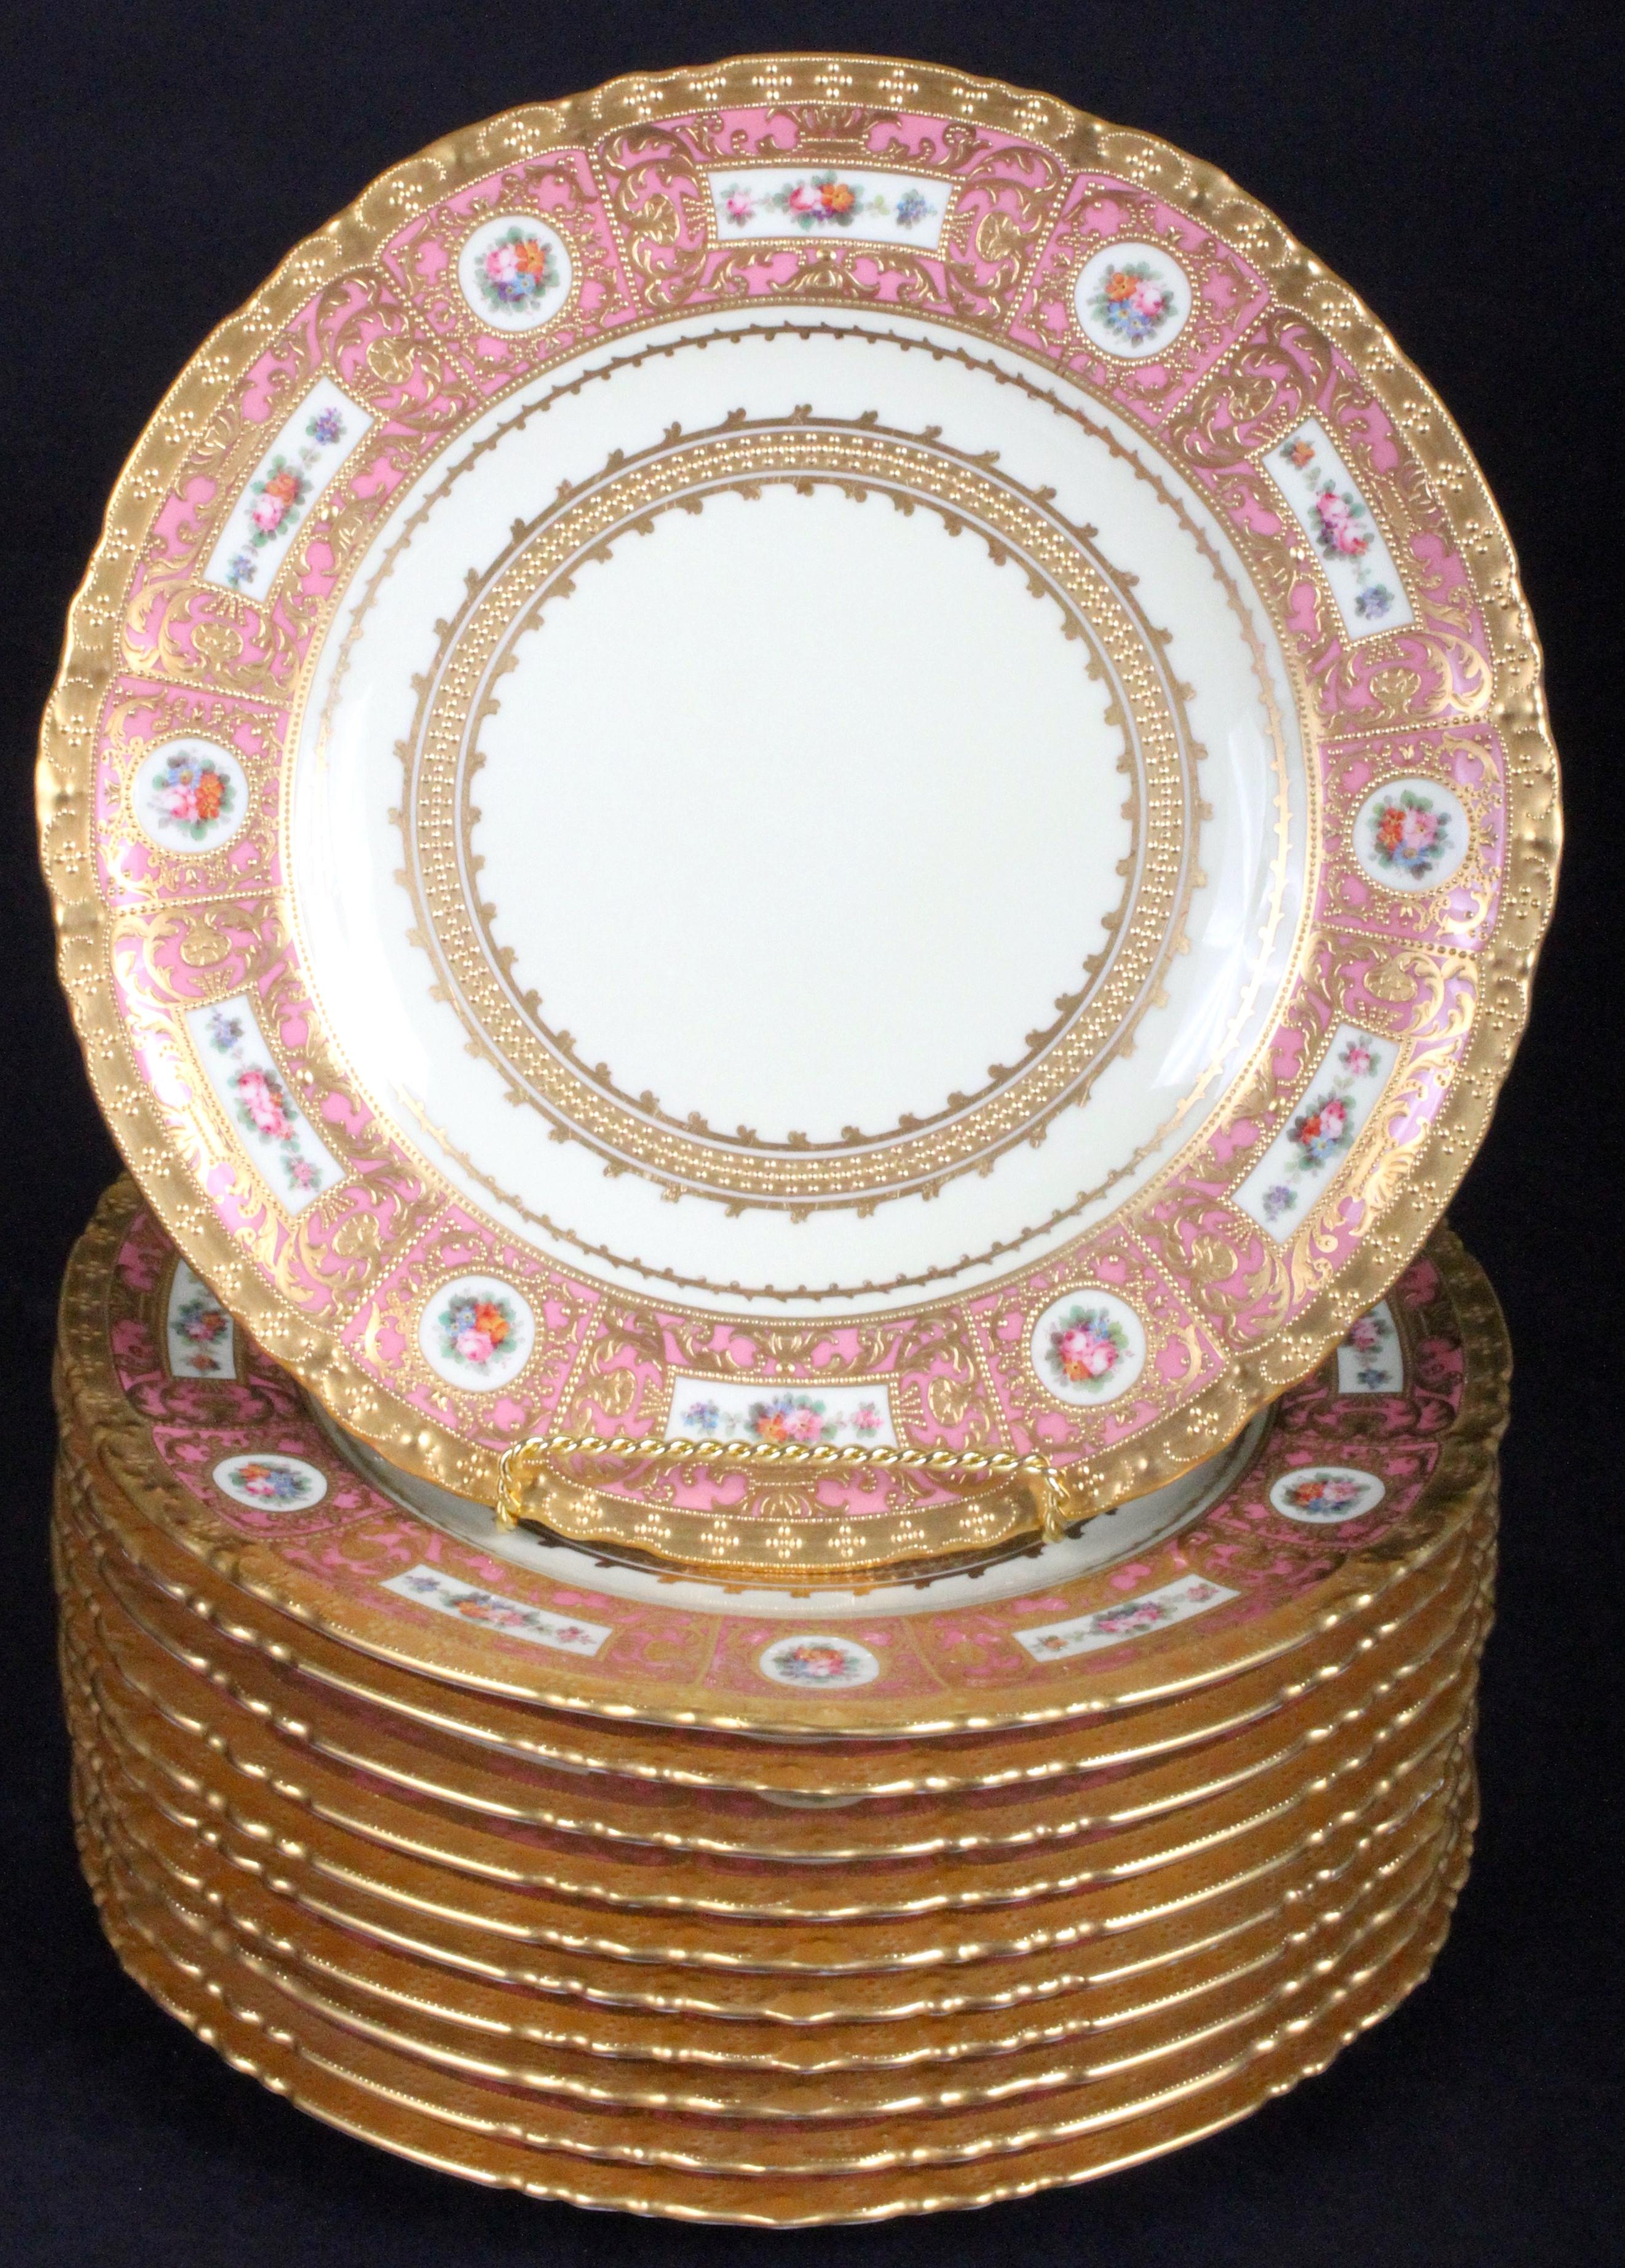 Neoclassical 11 Derby for Tiffany Hand Painted and Gilded Pink Service Plates For Sale